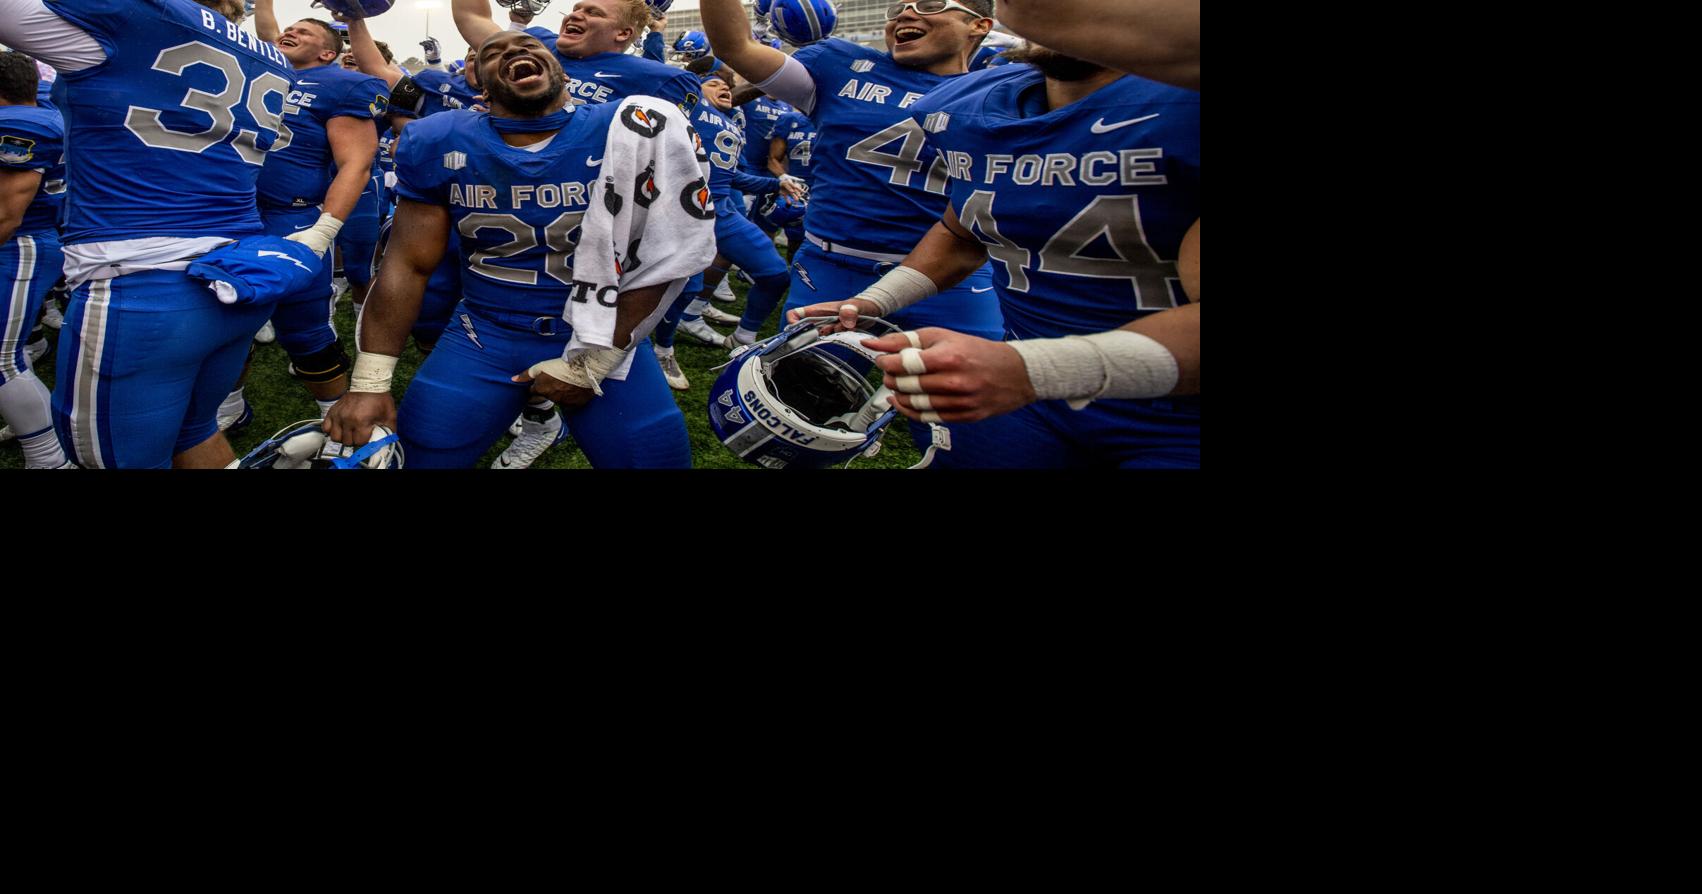 State title on the line for Air Force football as it can complete sweep of  CU, CSU as Rams visit, Sports Coverage